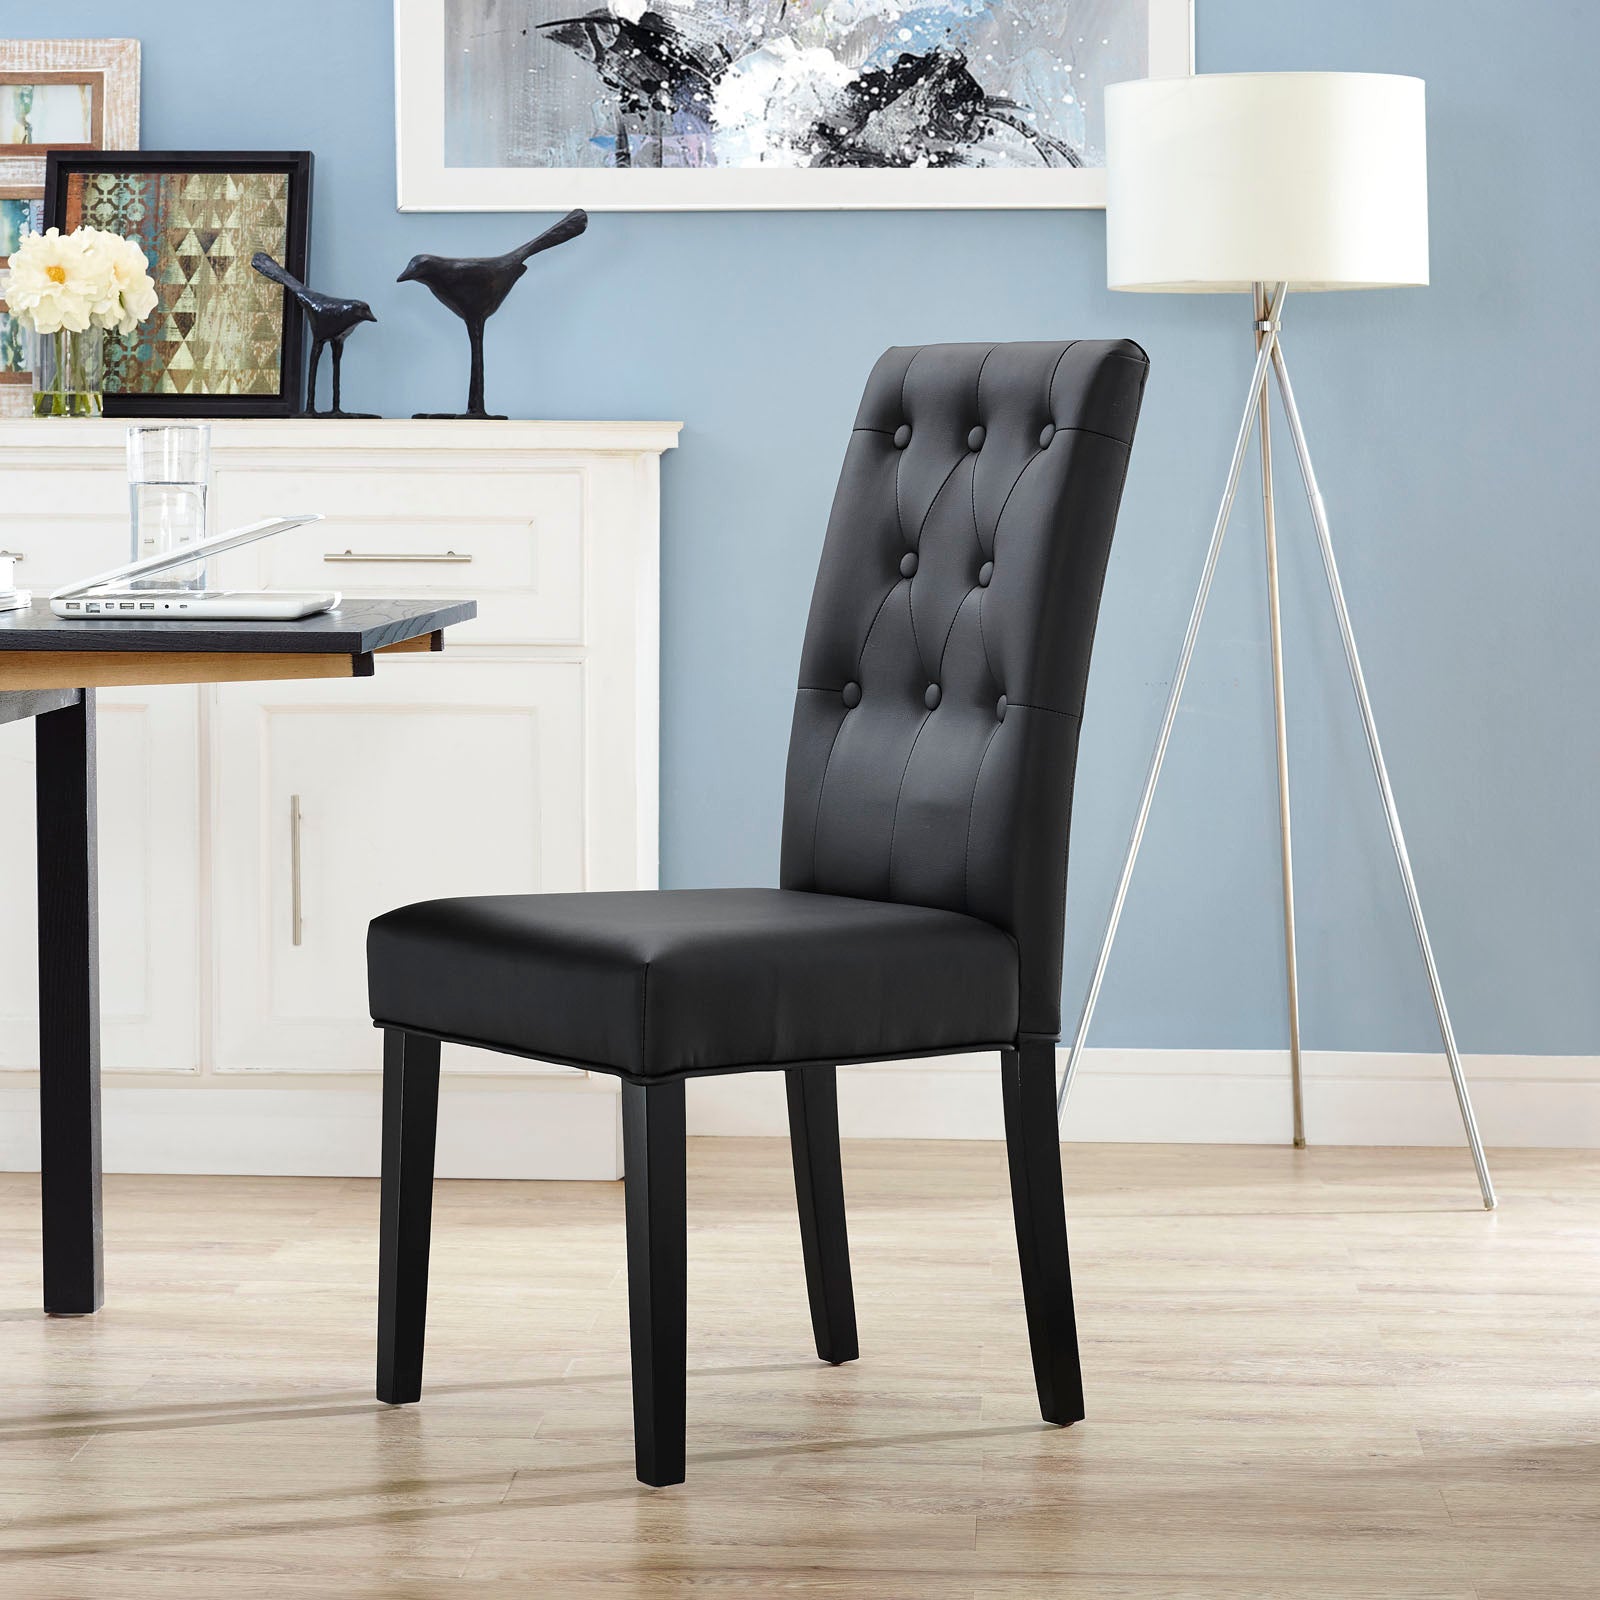 Modway Dining Chairs - Confer Dining Chair Black